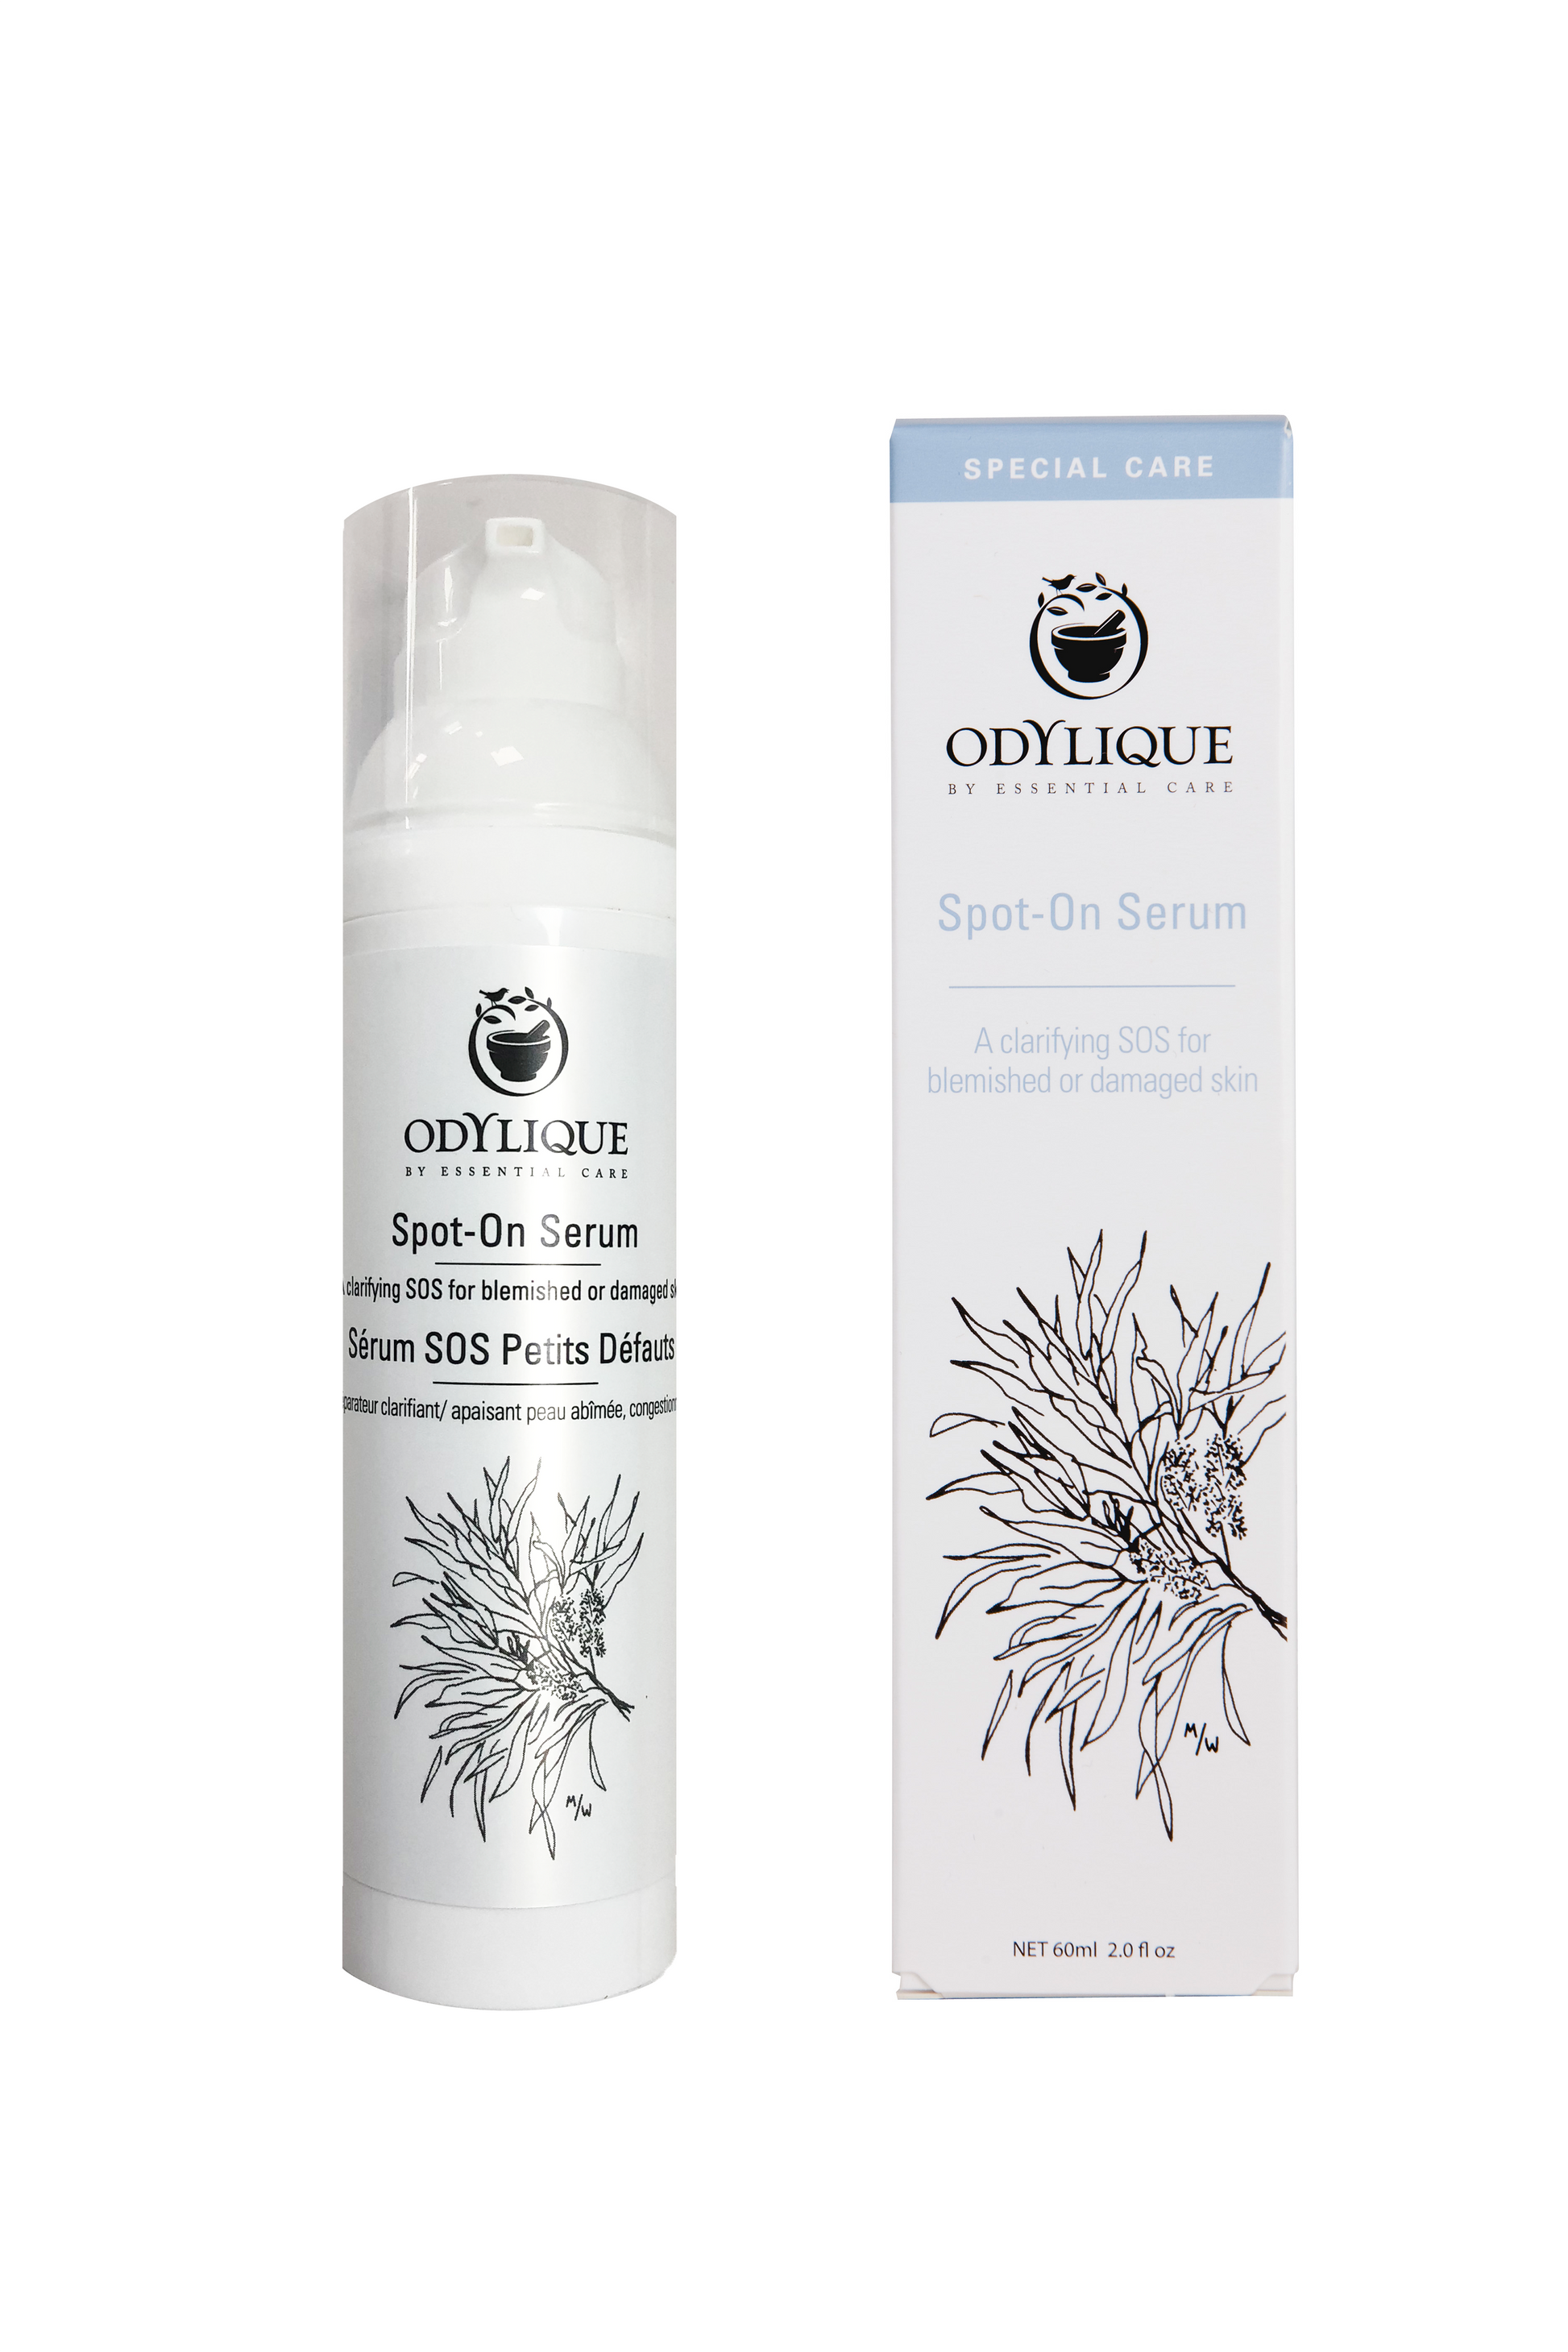 Odylique Spot-On Serum for spots, acne, cracked or broken skin. Natural remedies.